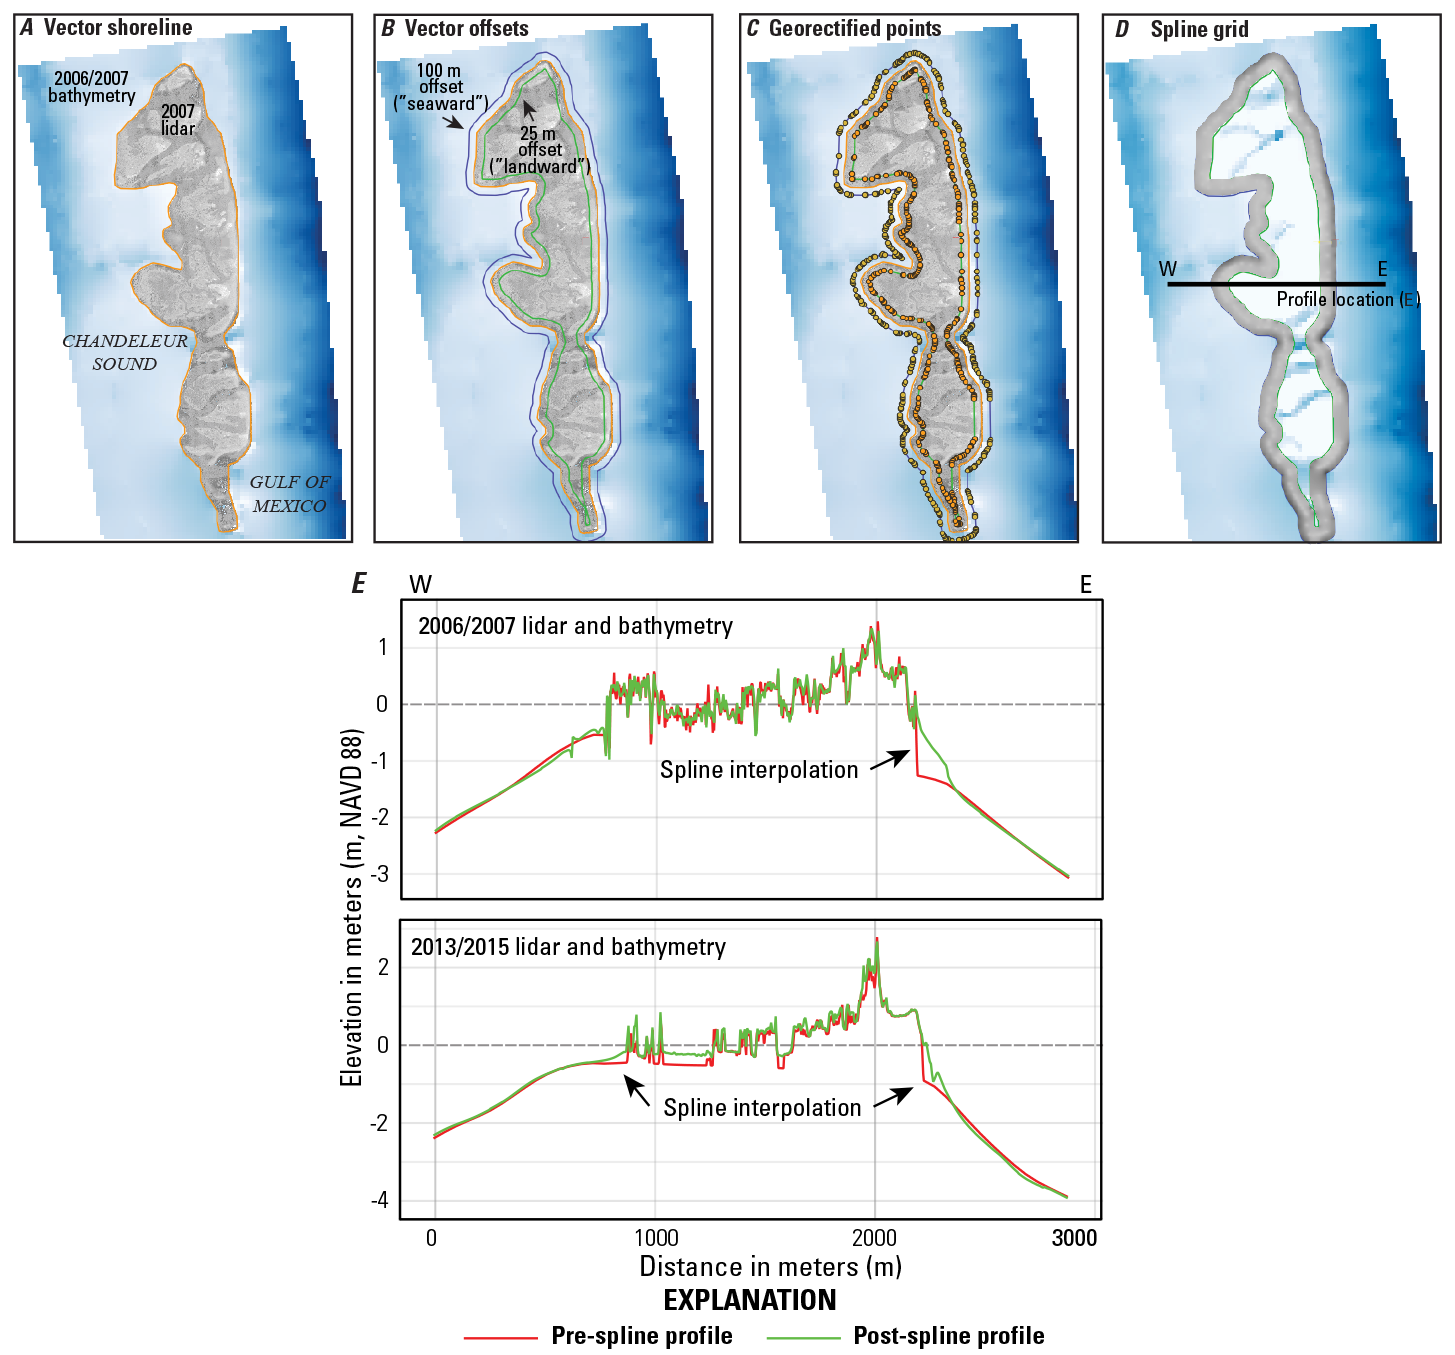 Figure 13. A is vector shoreline; B is vector offsets; C is georectified points, D
                        is spline grid. E is lidar and bathymetry profiles.